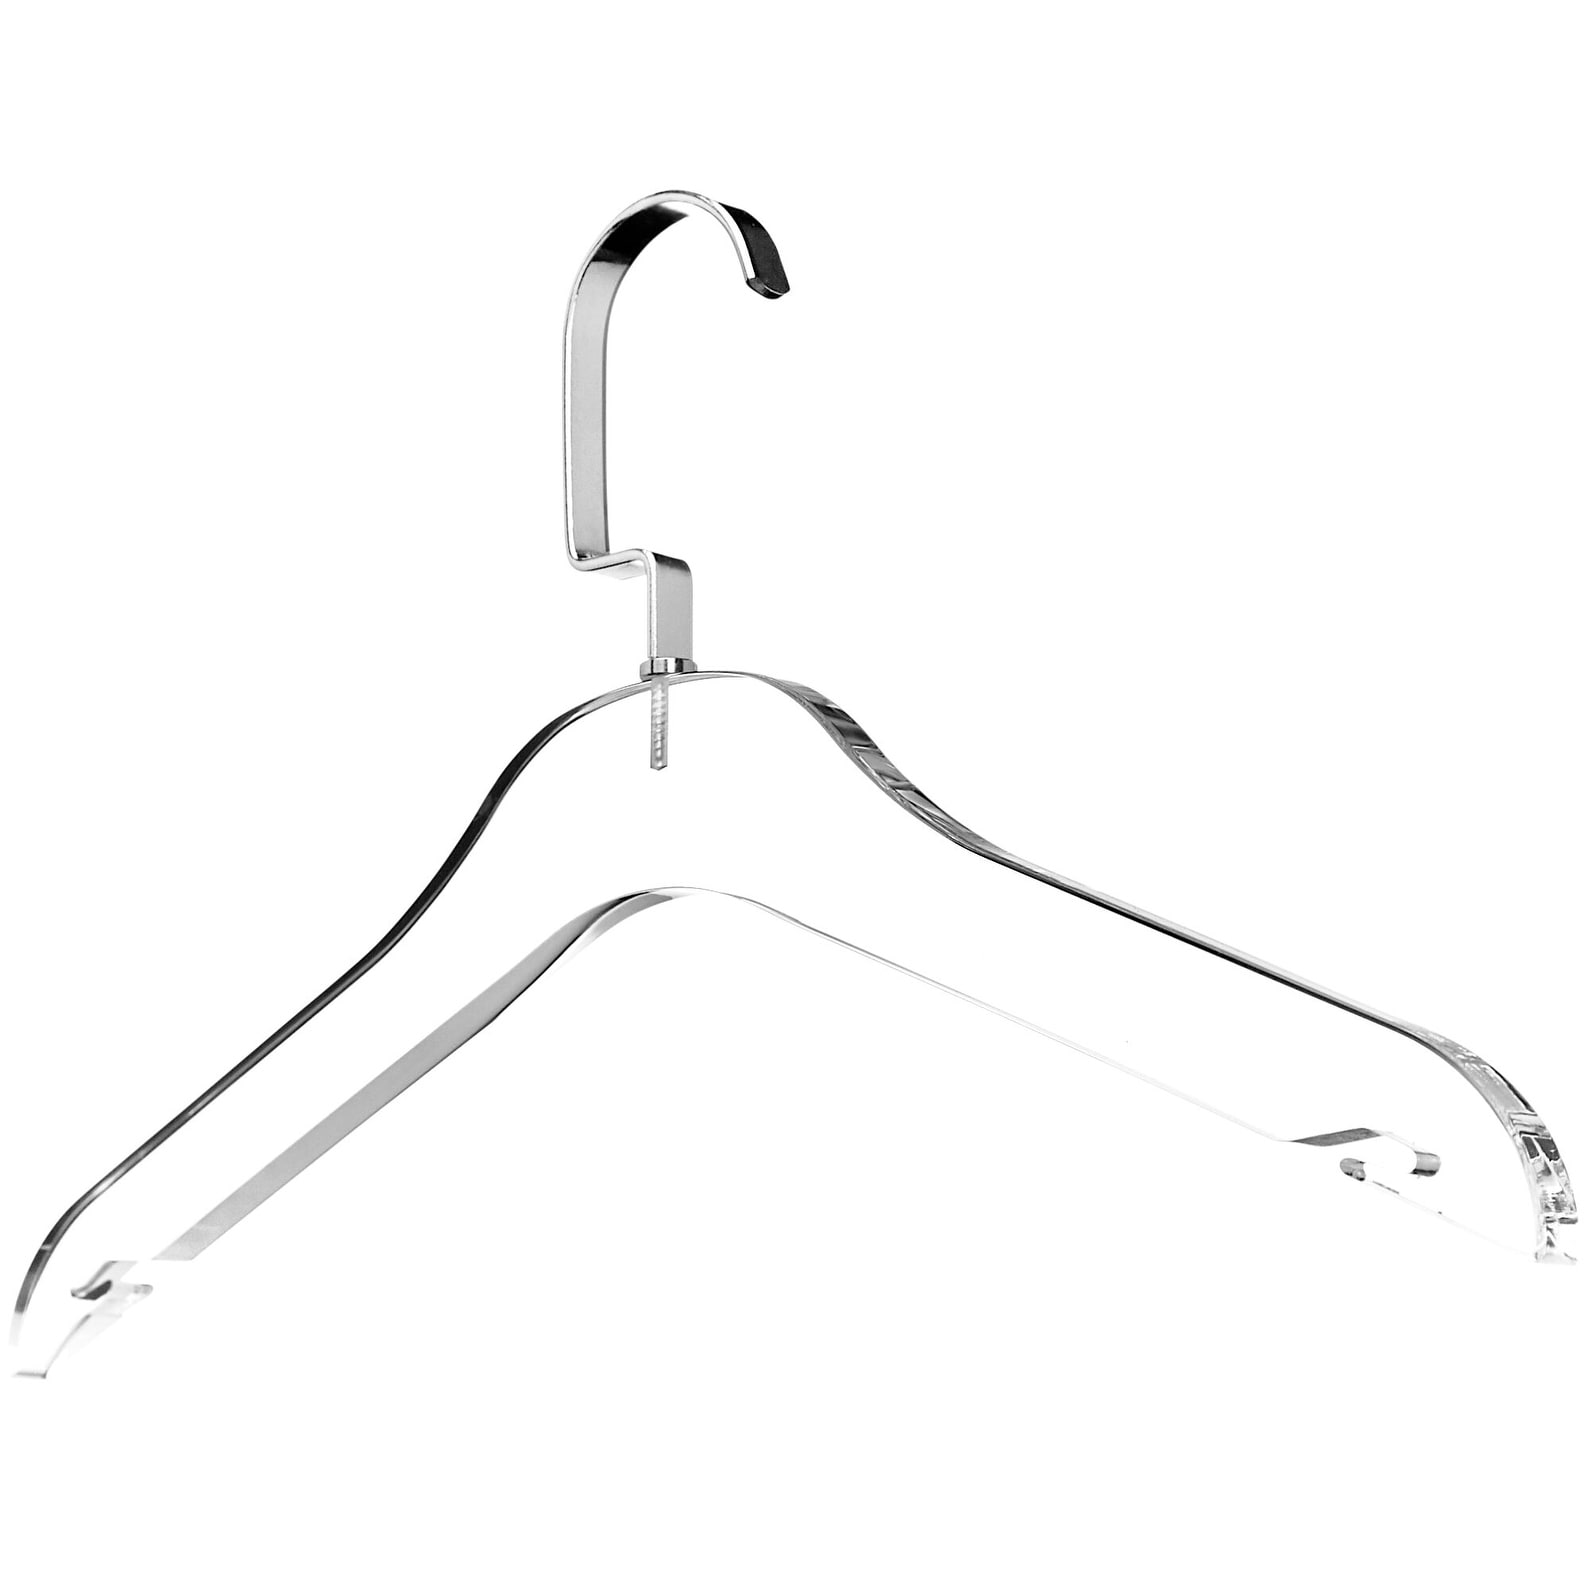 https://ak1.ostkcdn.com/images/products/is/images/direct/f5eaf6383b3081ccb6ecf2b2c126fbd19d3c5022/Designstyles-Clear-Acrylic-Clothes-Hangers---10-Pk.jpg